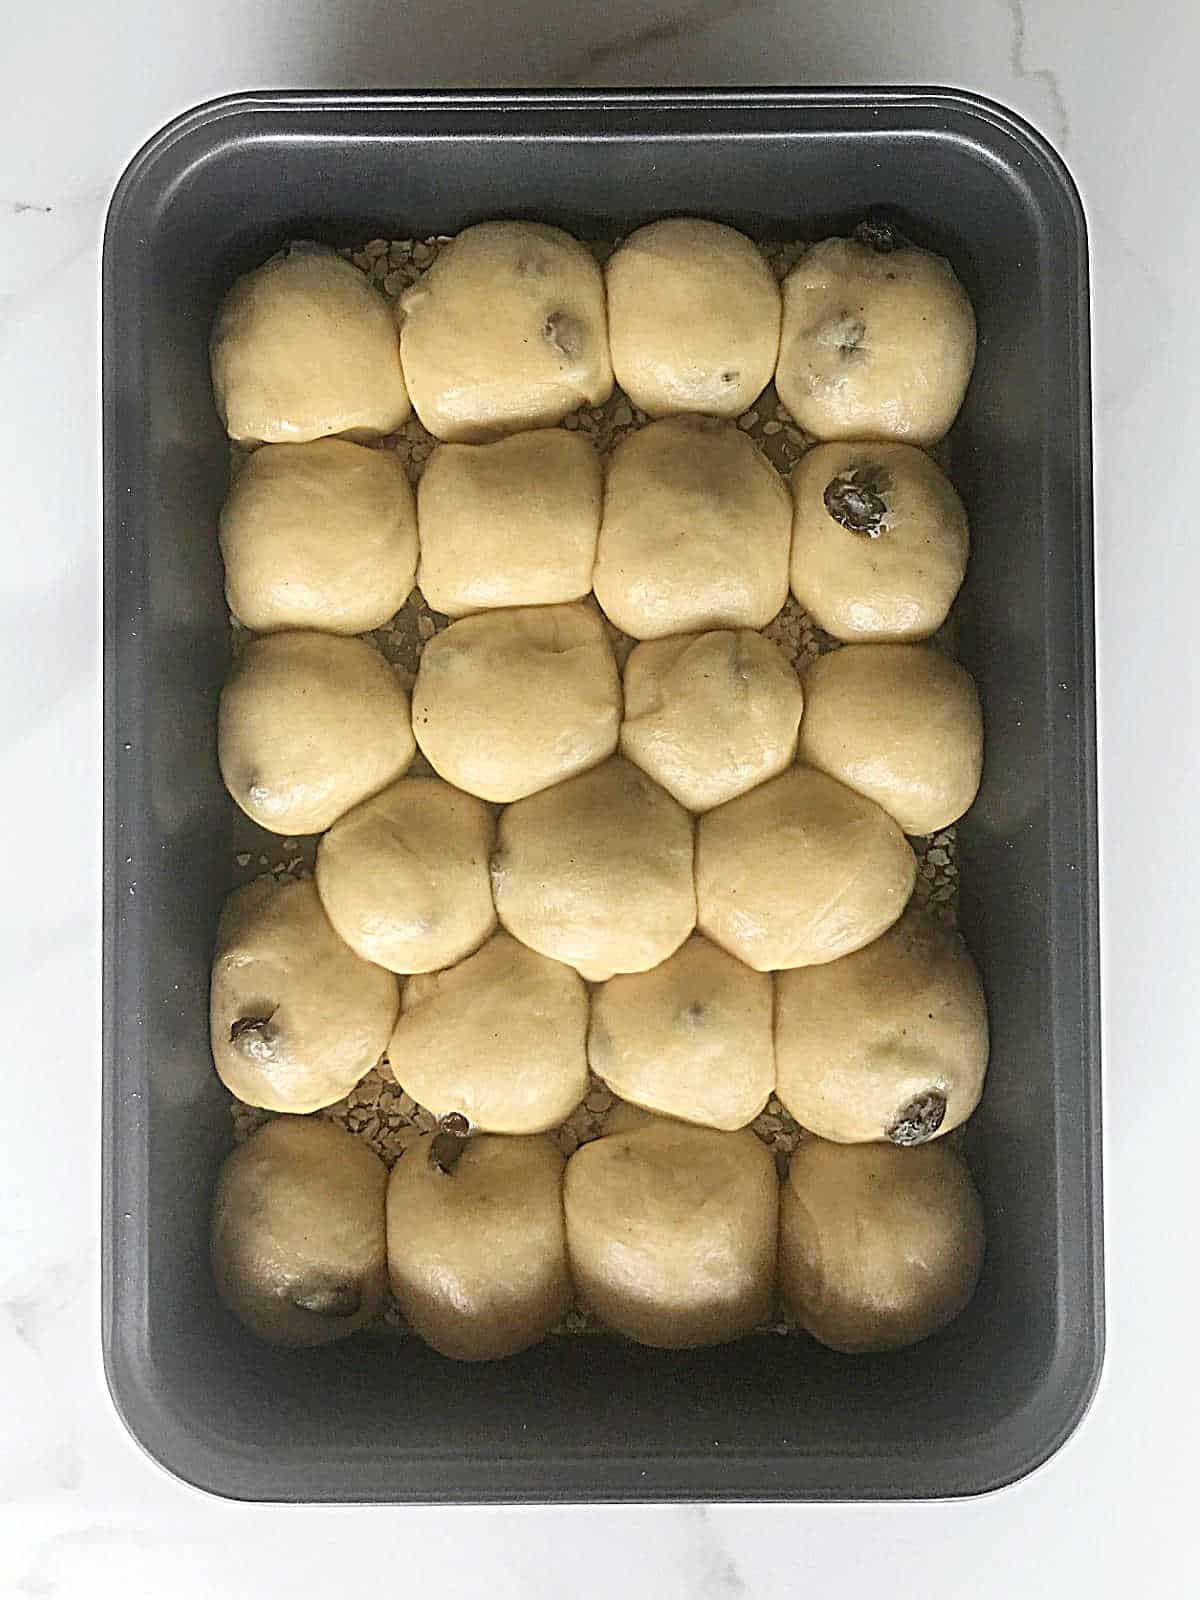 Proofed small raisin buns in a metal rectangular baking pan on a white surface.